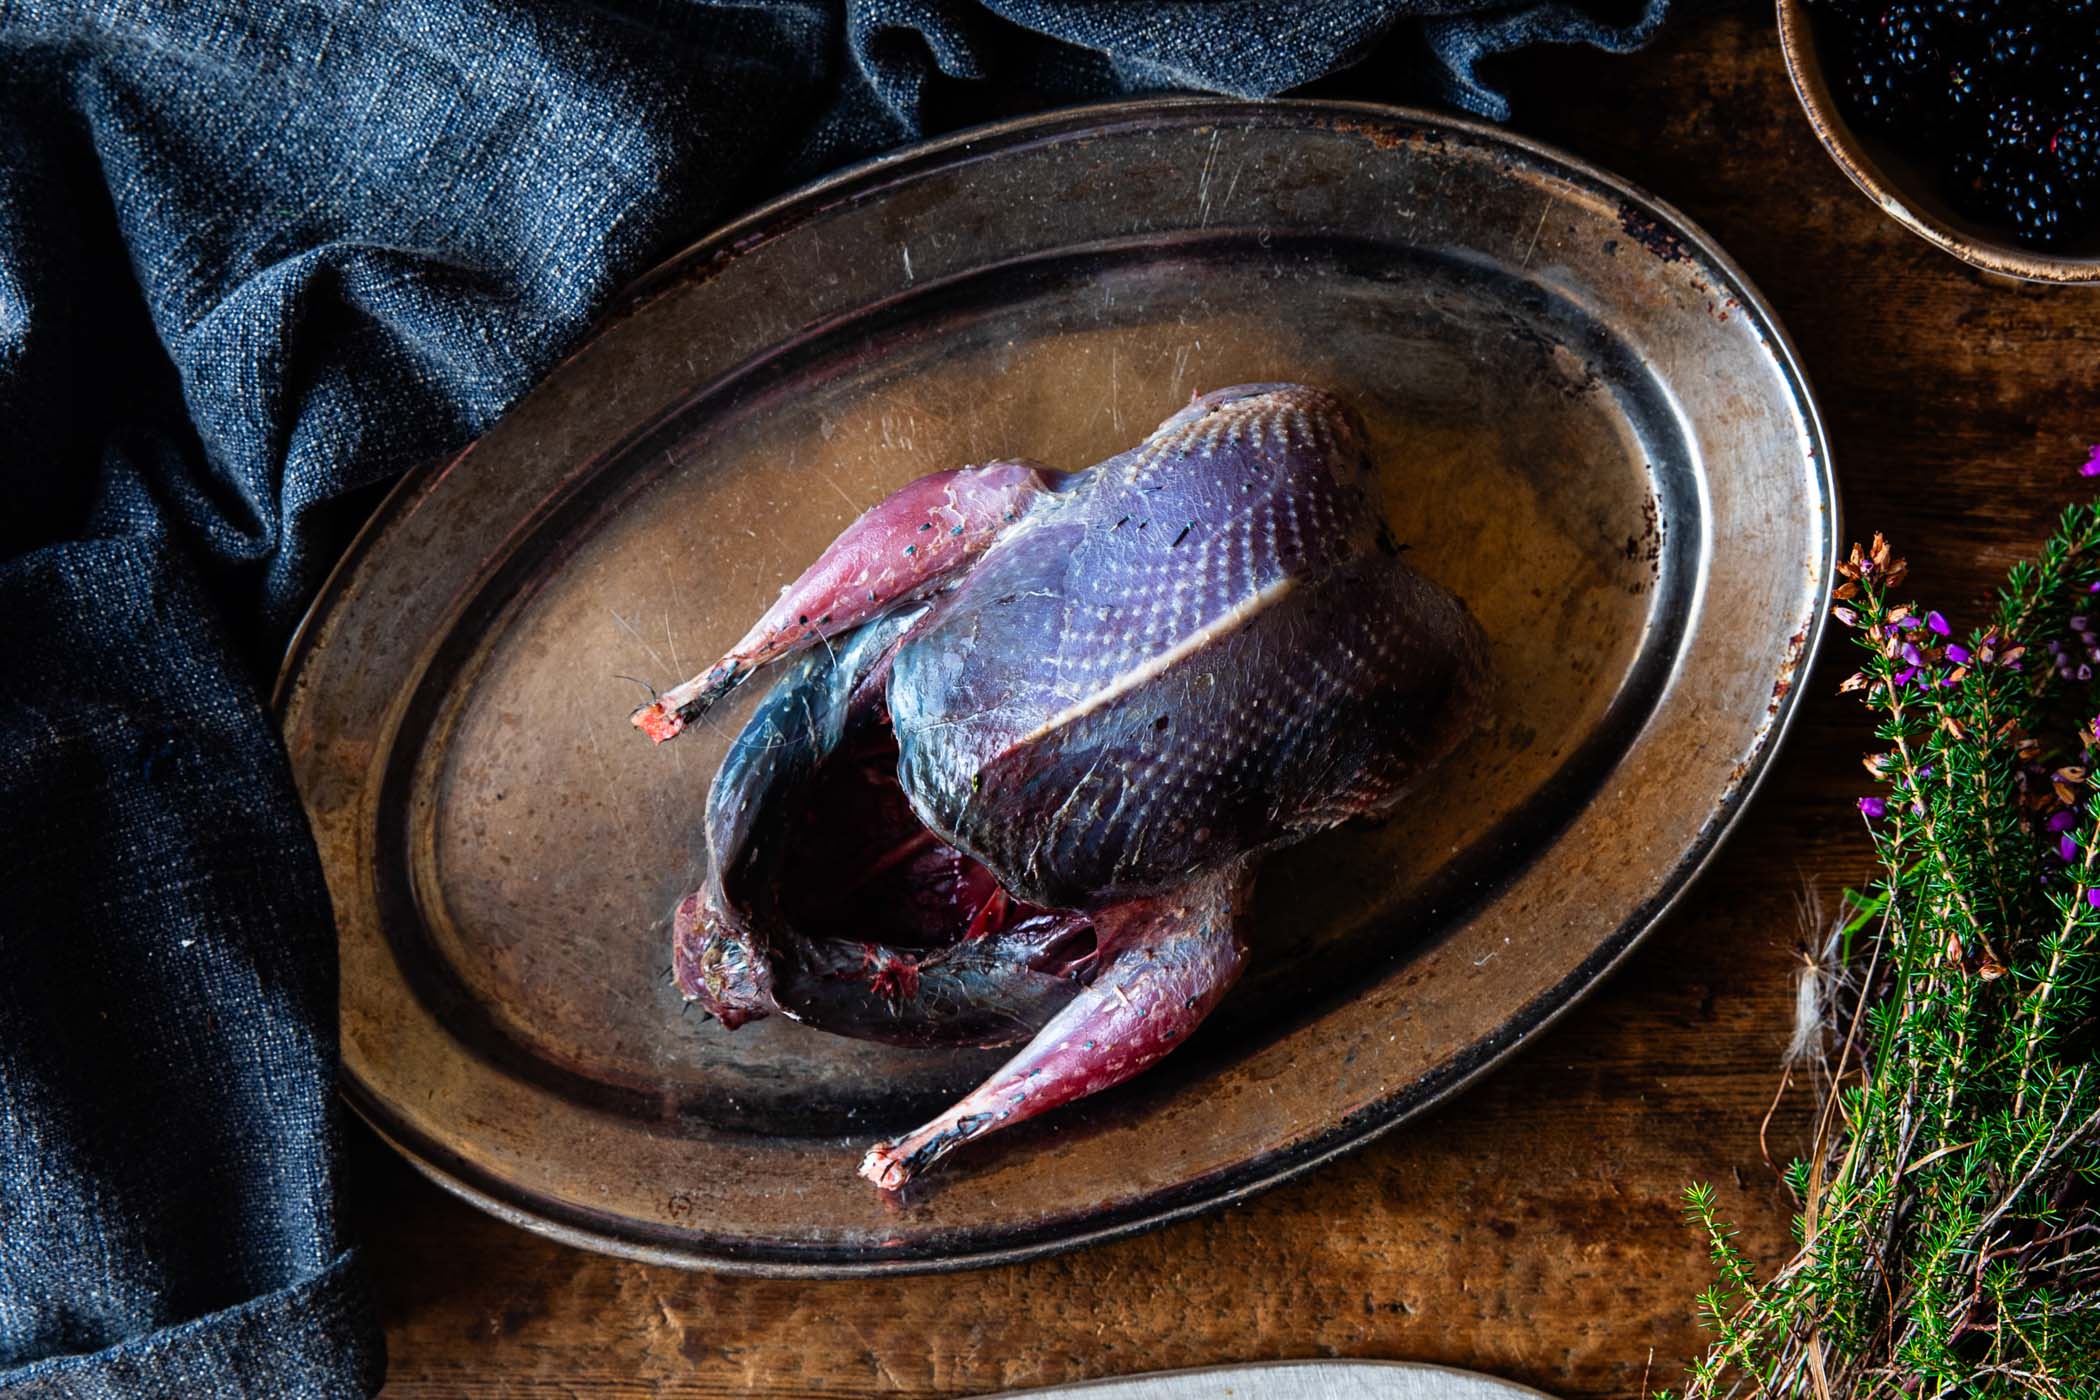 A raw whole grouse on a serving plate.